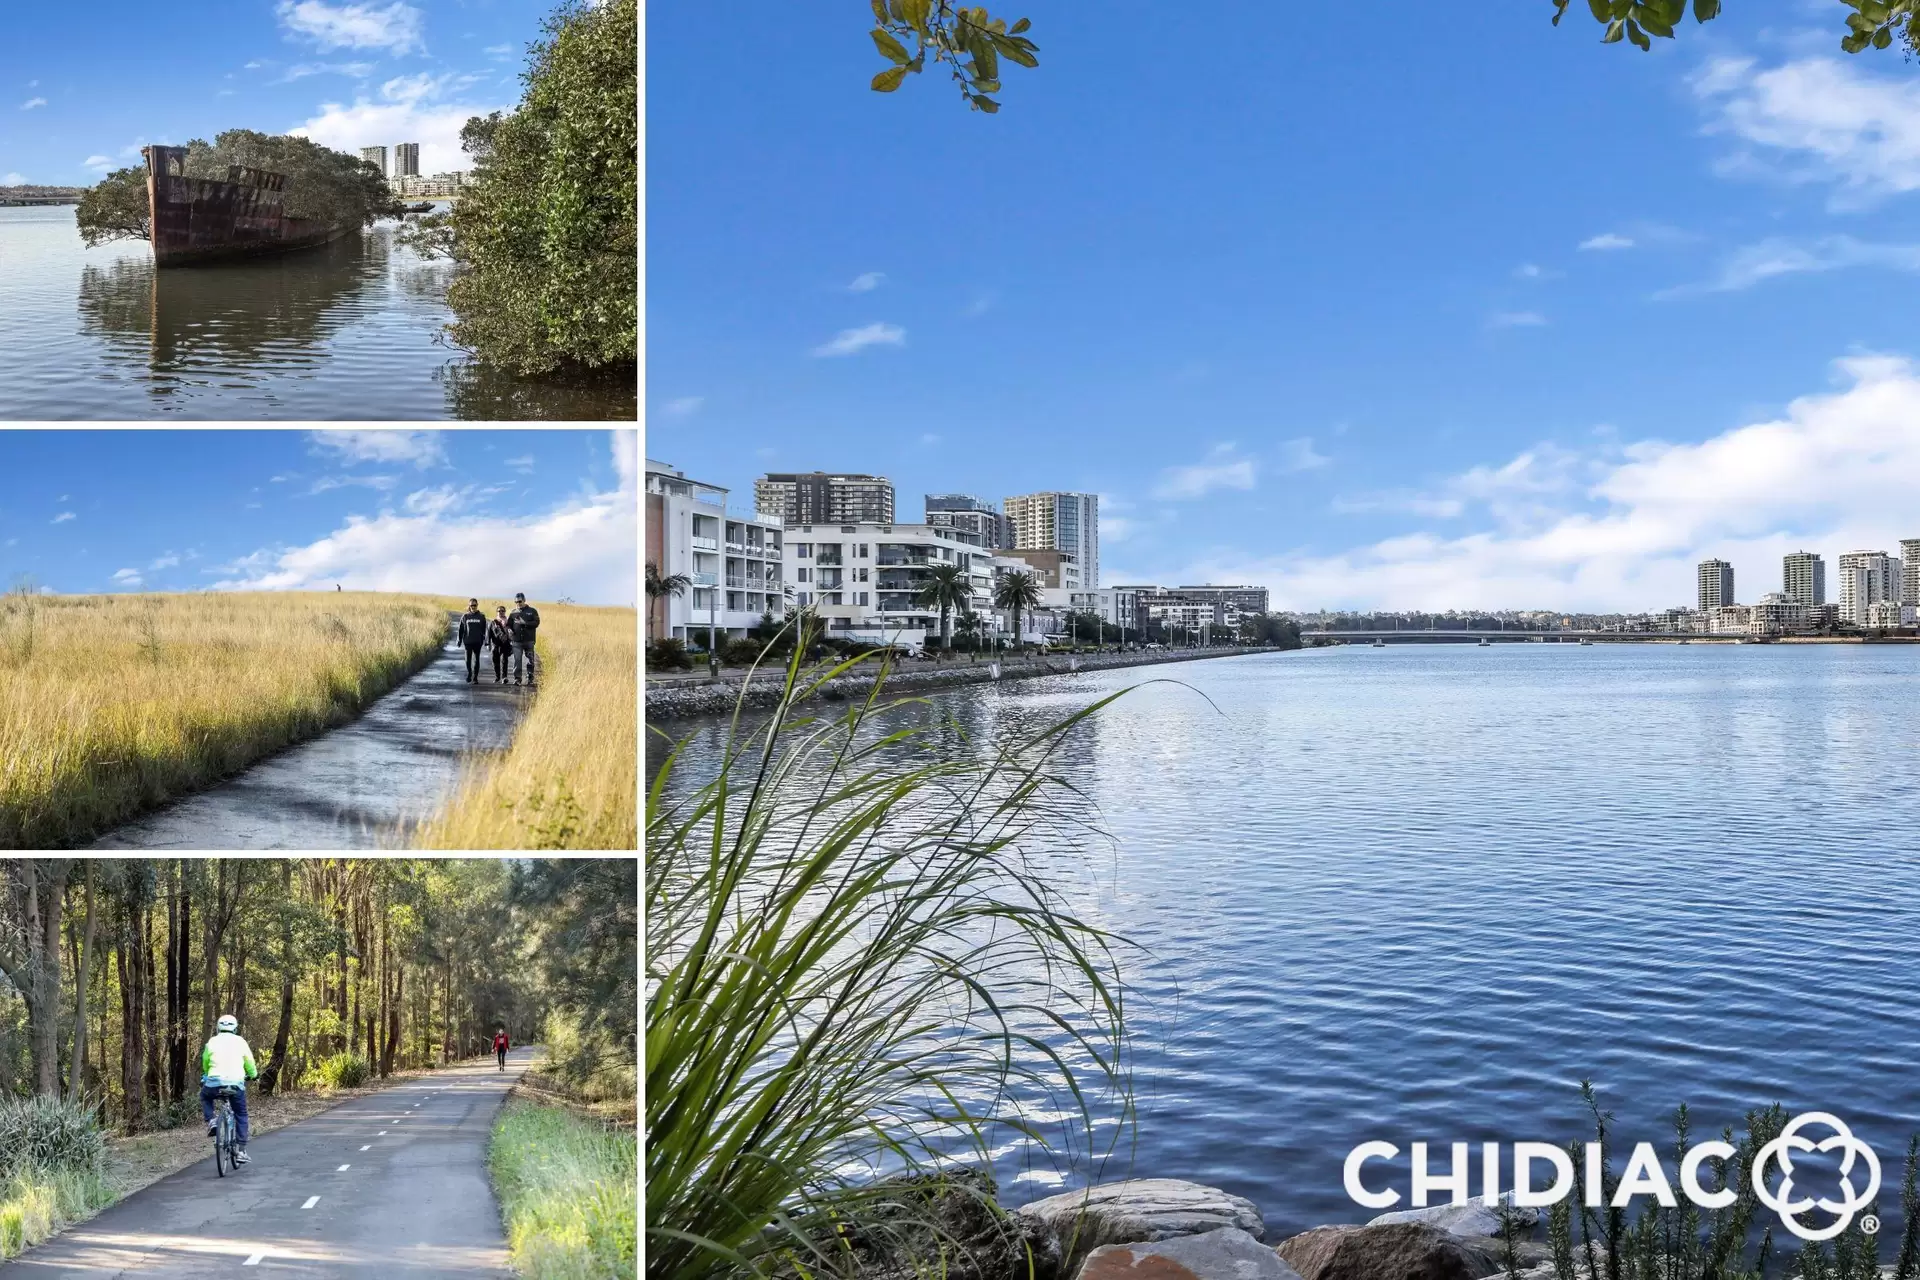 77/27 Bennelong Parkway, Wentworth Point Leased by Chidiac Realty - image 1